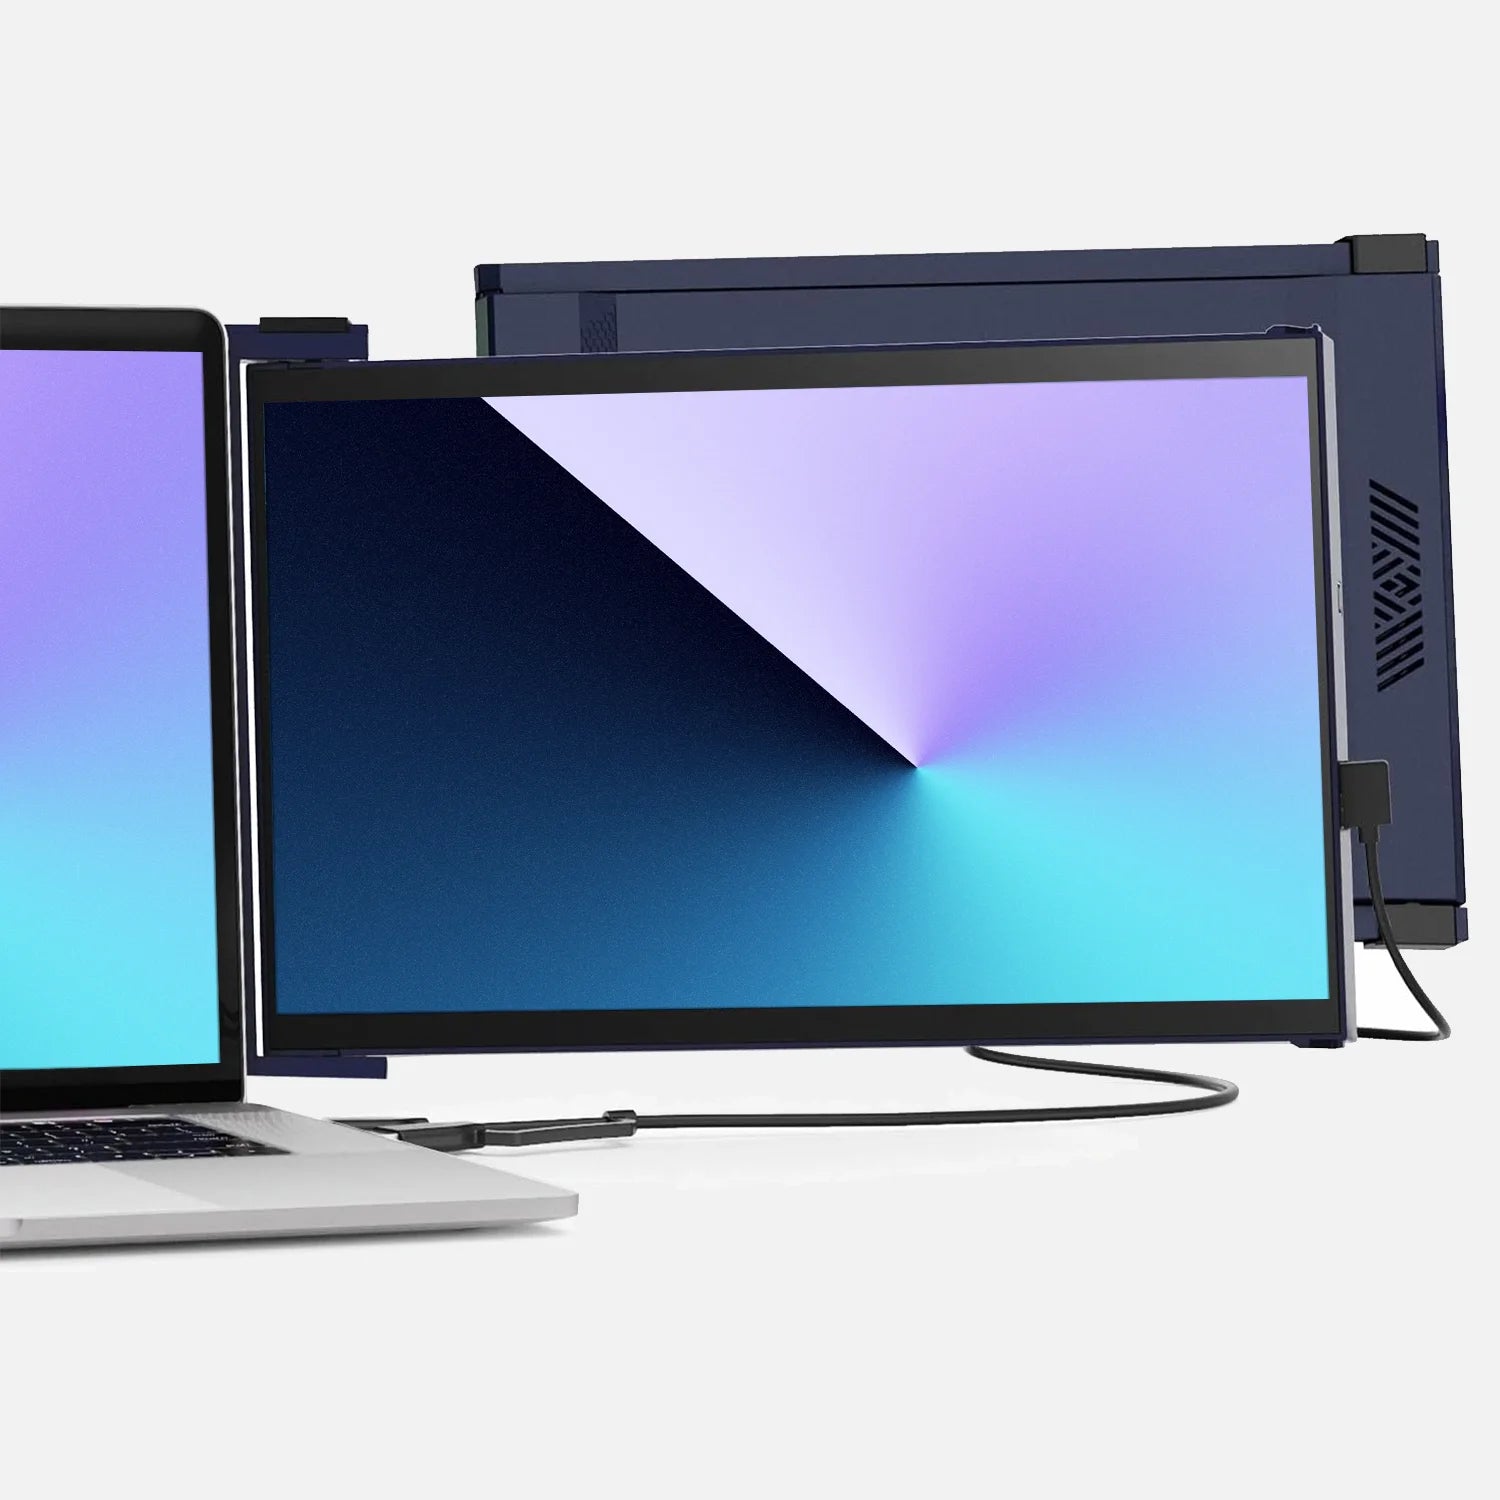 Blue Duex Max dual monitor for laptop